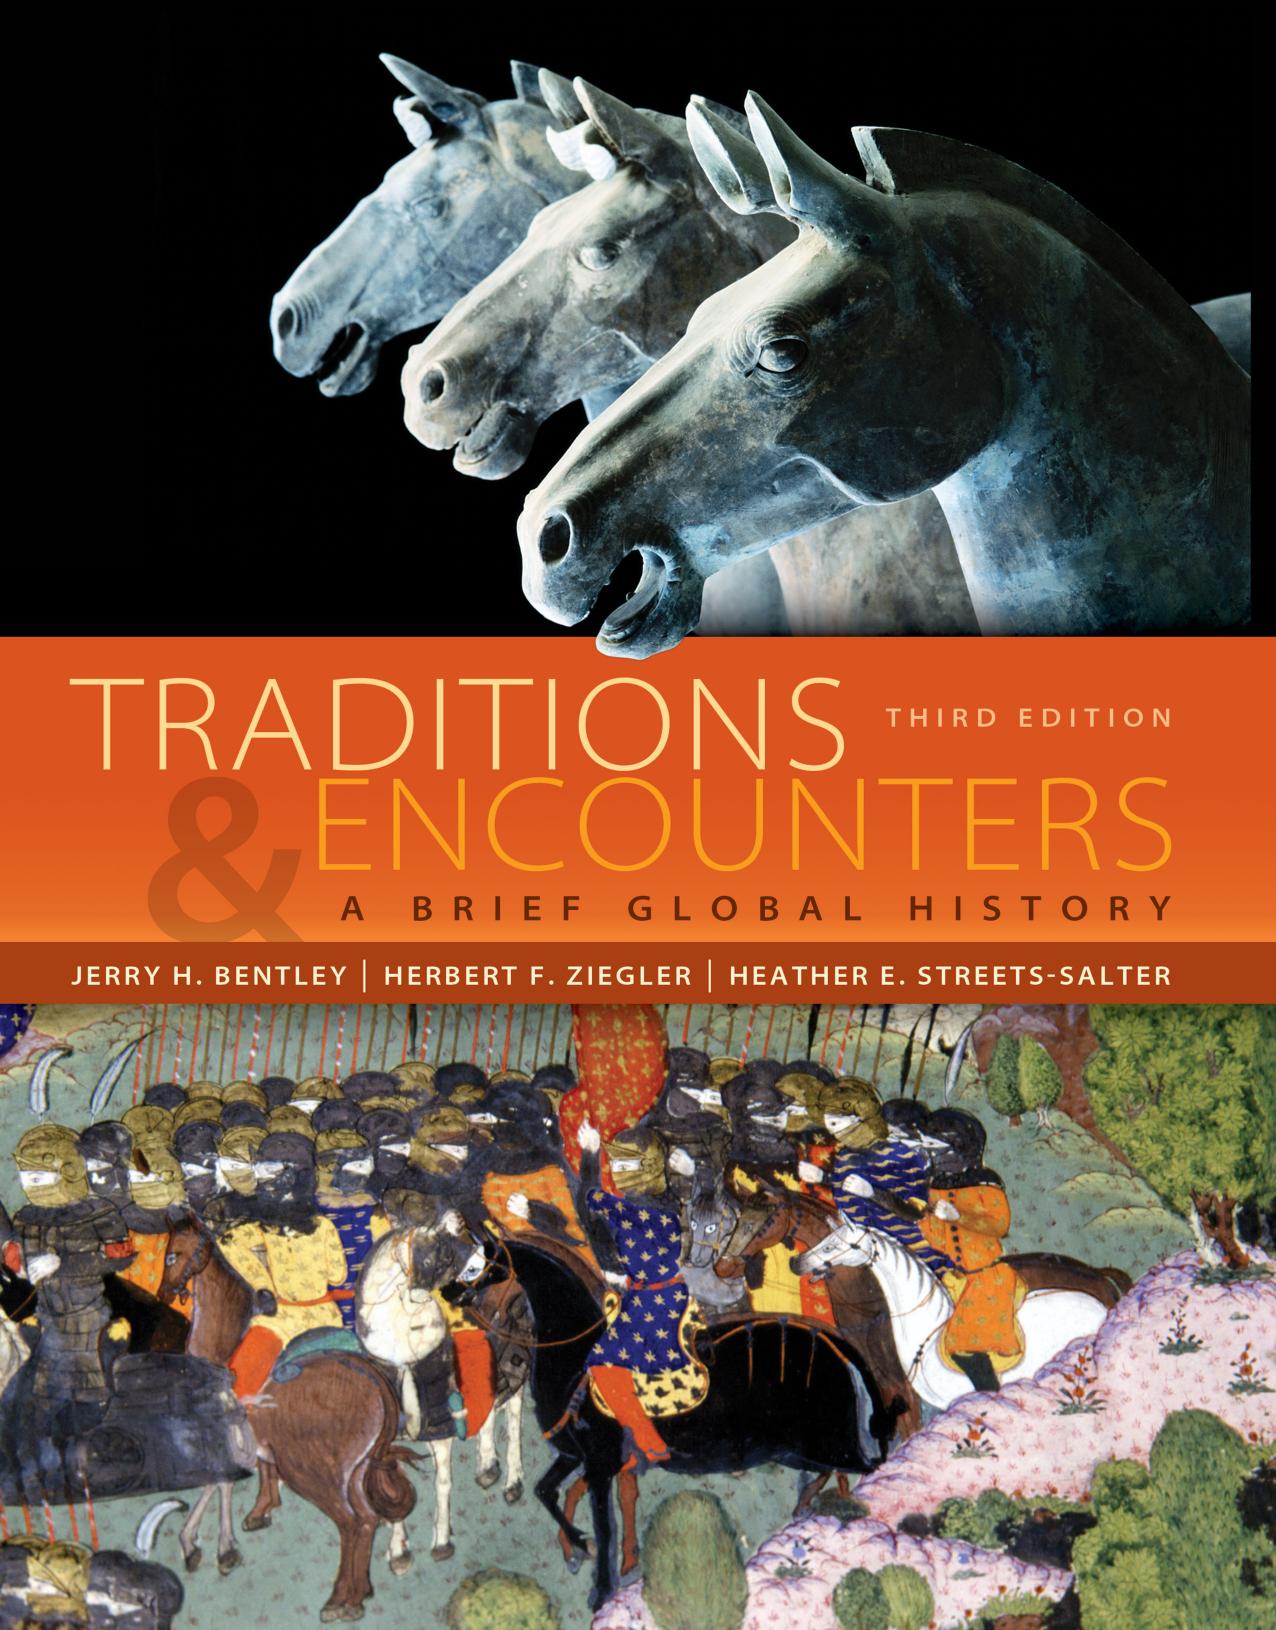 Traditions & Encounters A Brief Global History 3rd Edition by Jerry Bentley.jpg